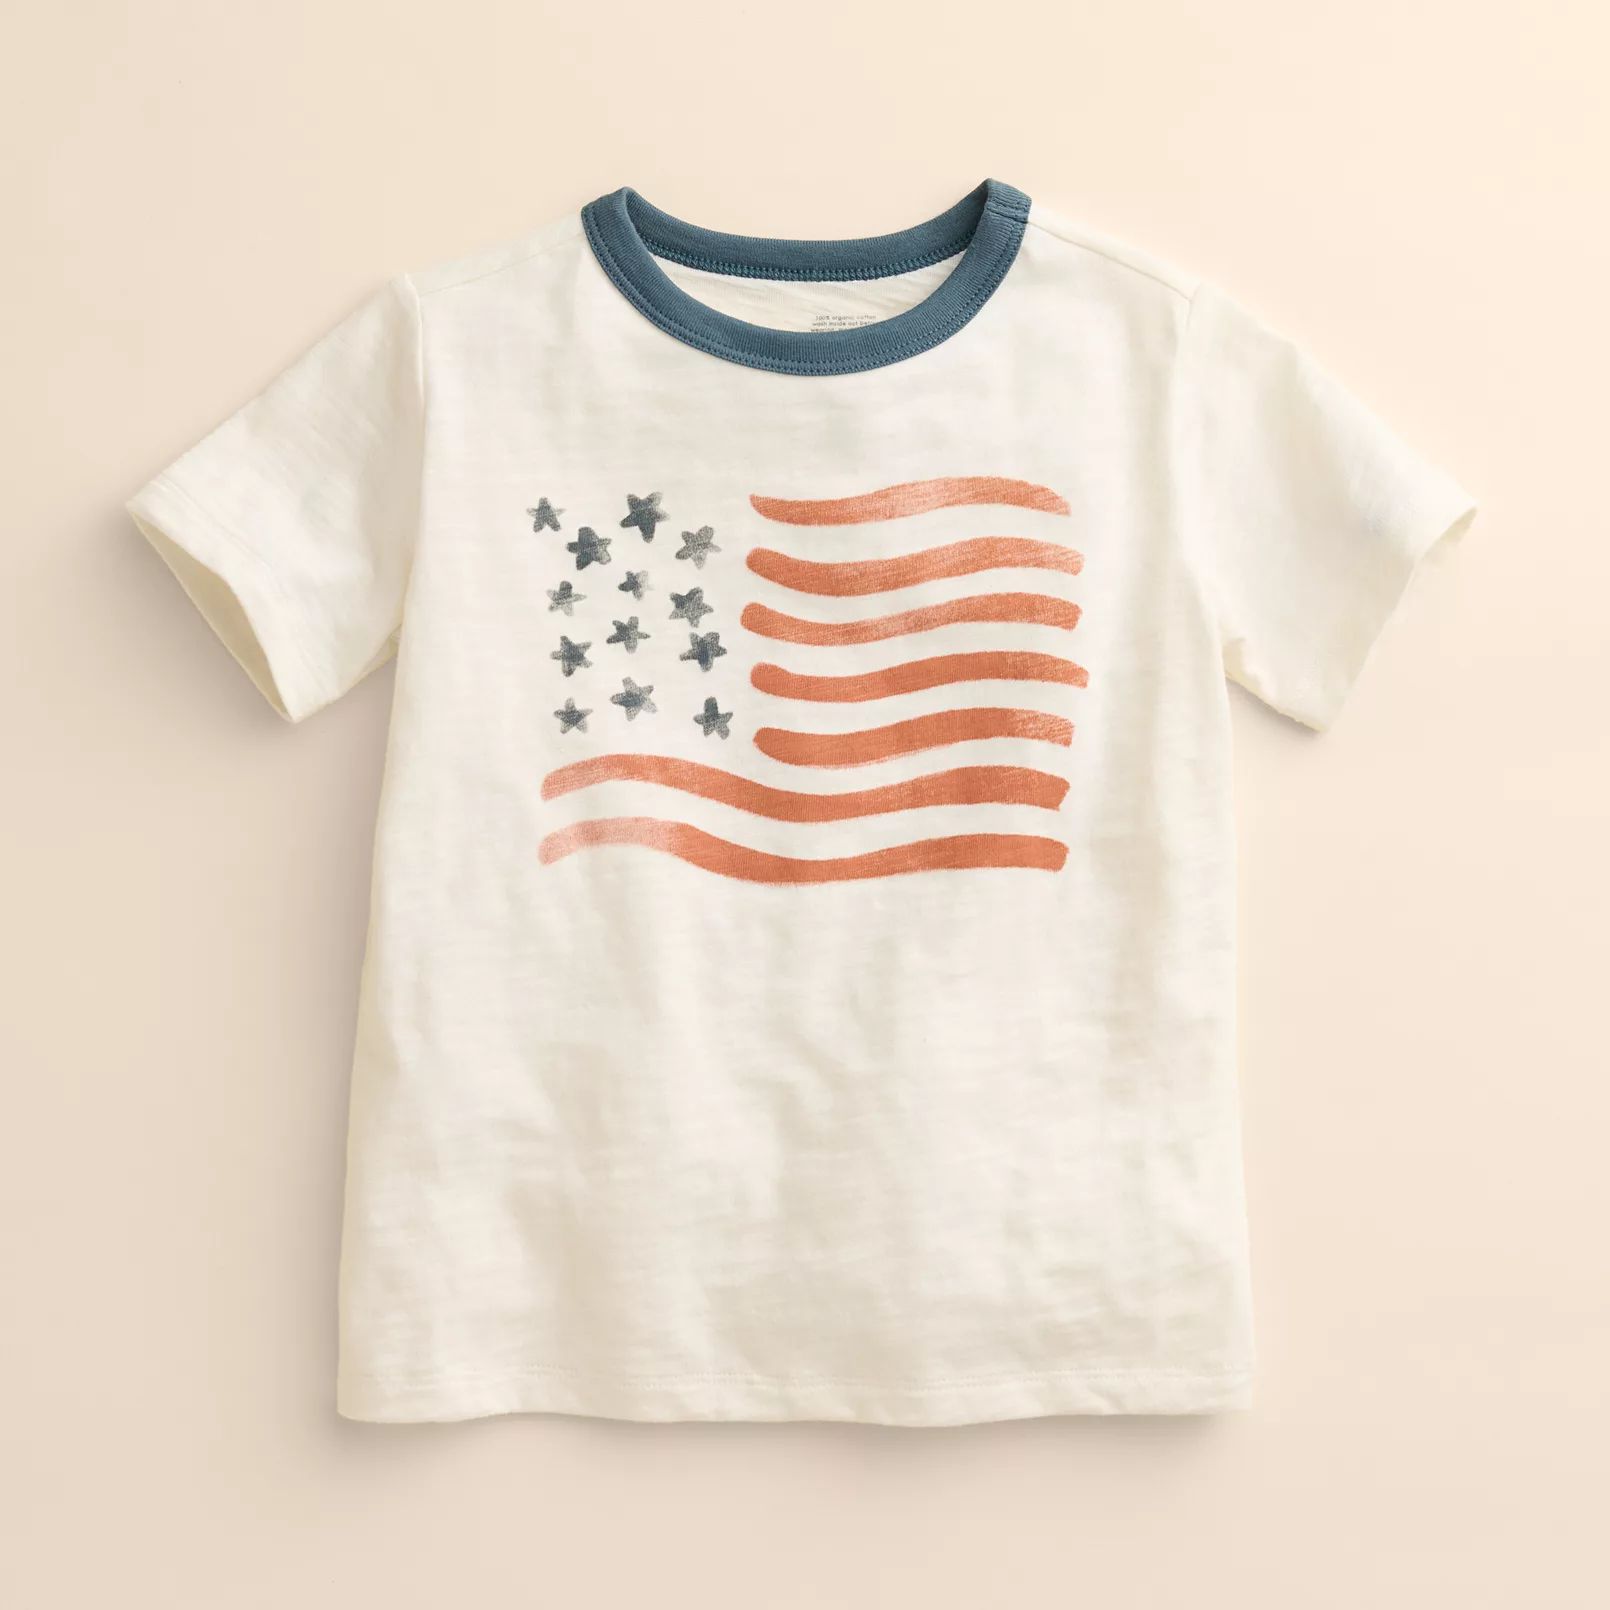 Baby & Toddler Little Co. by Lauren Conrad Organic Graphic Tee | Kohl's